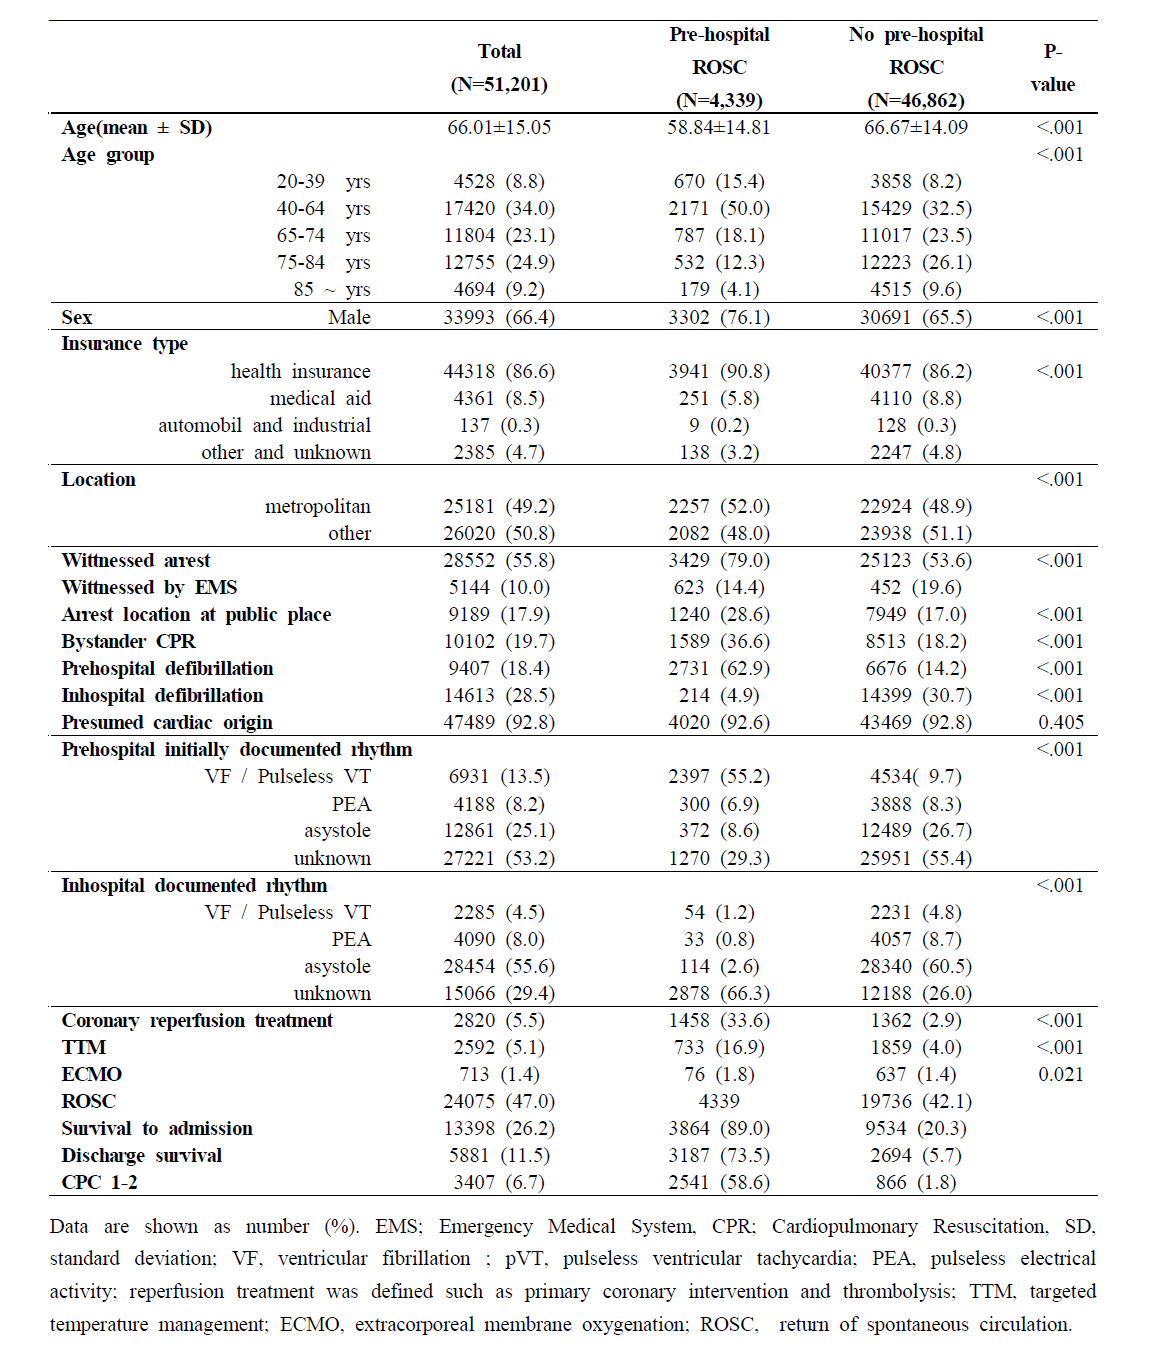 The comparison of basic characteristics CPR variables and treatments between pre-hospital group and No pre-hospital ROSC group